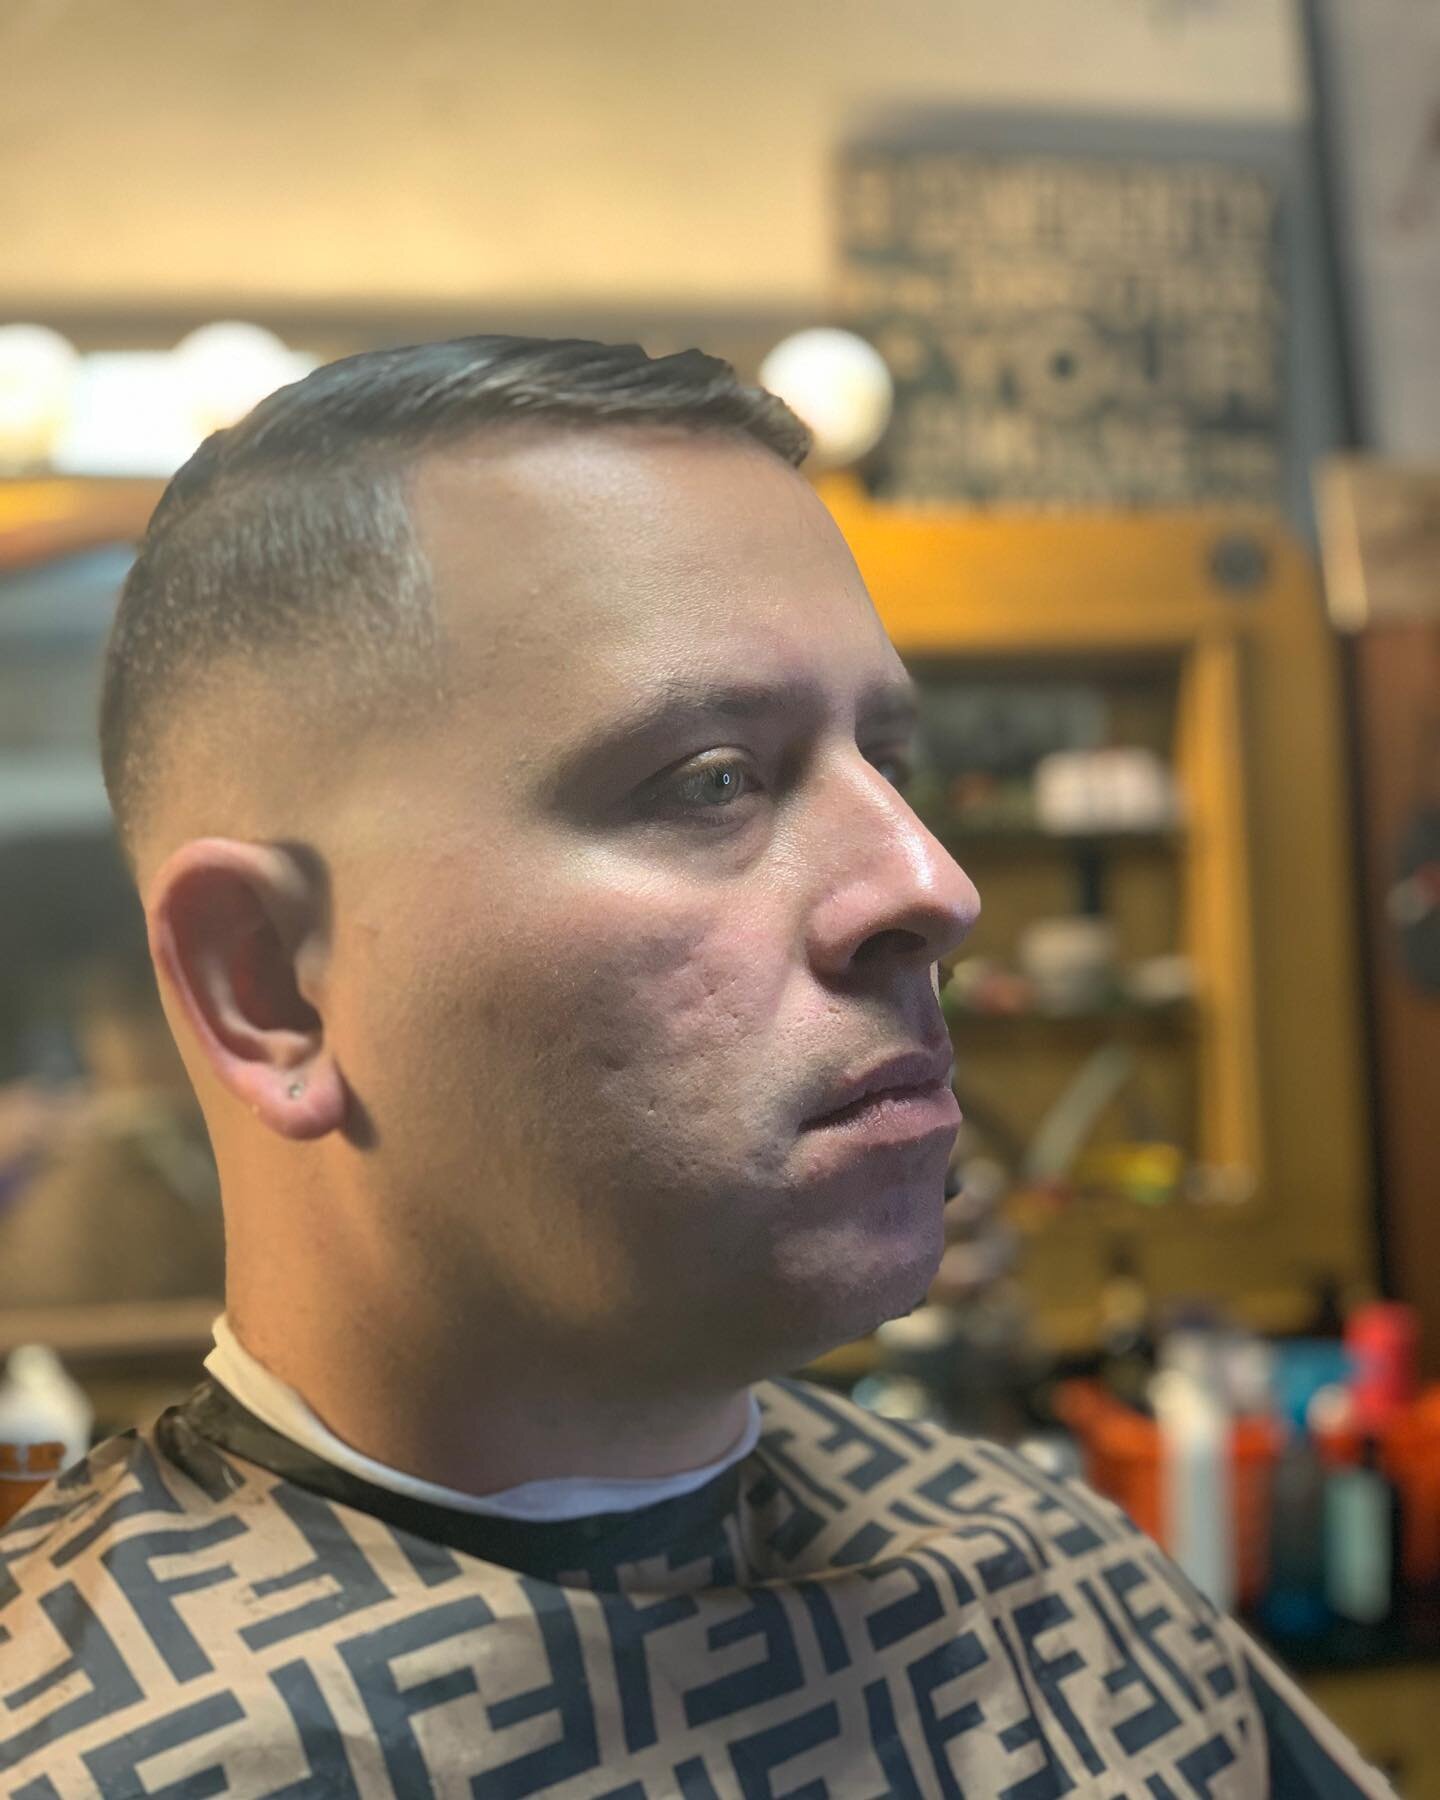 Being a barber is about taking care of the people. 

E ✂️ C L U S I V E 

#exclusive #exclusivehaircuts #mensgrooming #hairstylist #barbers #mensfades #hairstudio #ithaca #ithacany #syracuse #syracusebarbers #armorysquare #downtownsyracuse #fingerlak